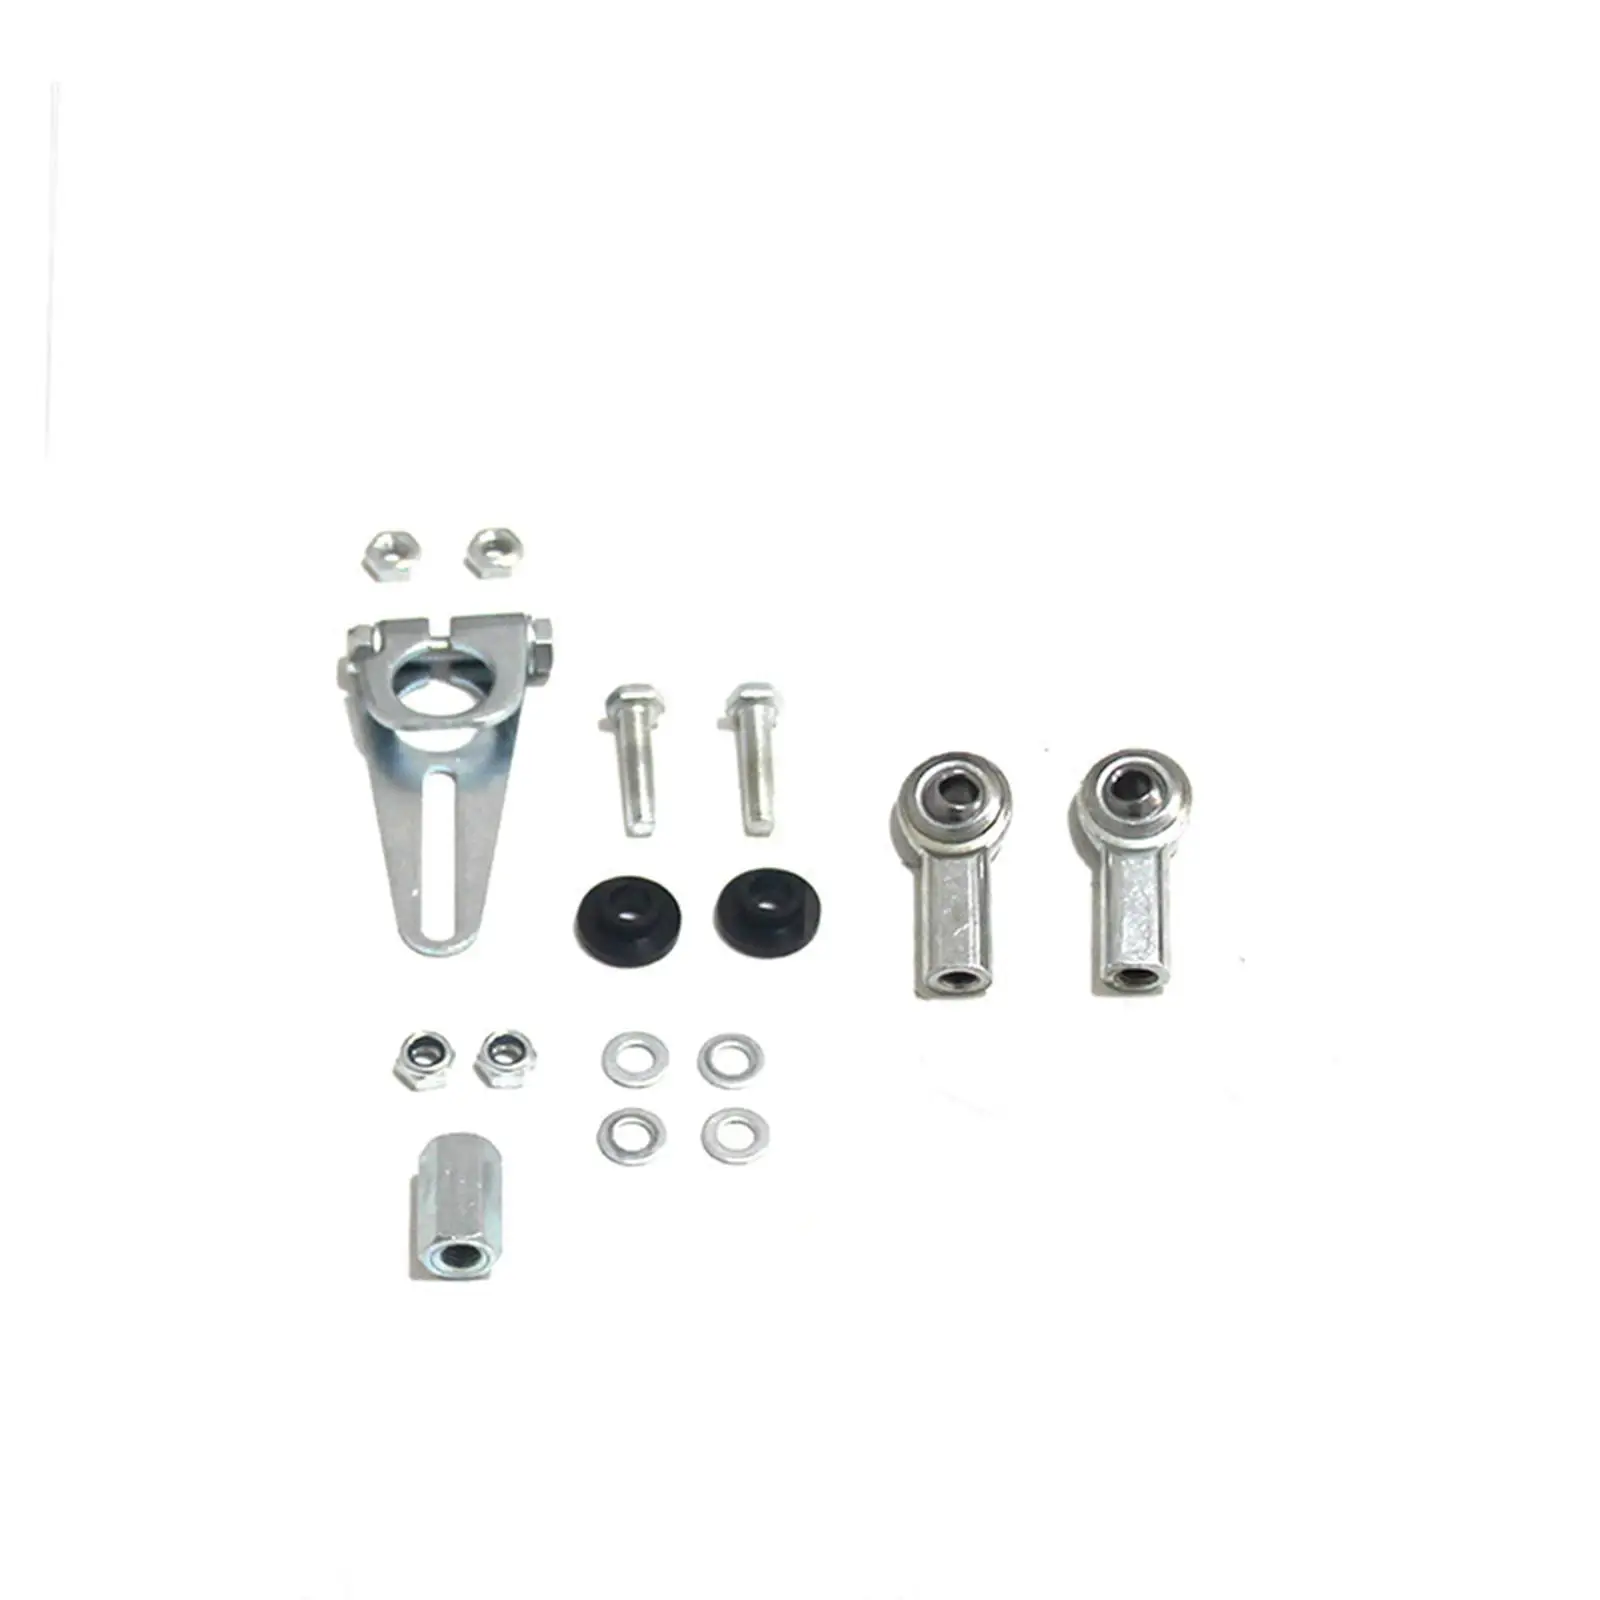 Adjustable Transmission Column Shift Linkage Kit High Performance Directly Replace for GM TH-200 4L60 TH-700R4 TH-400 4L60E